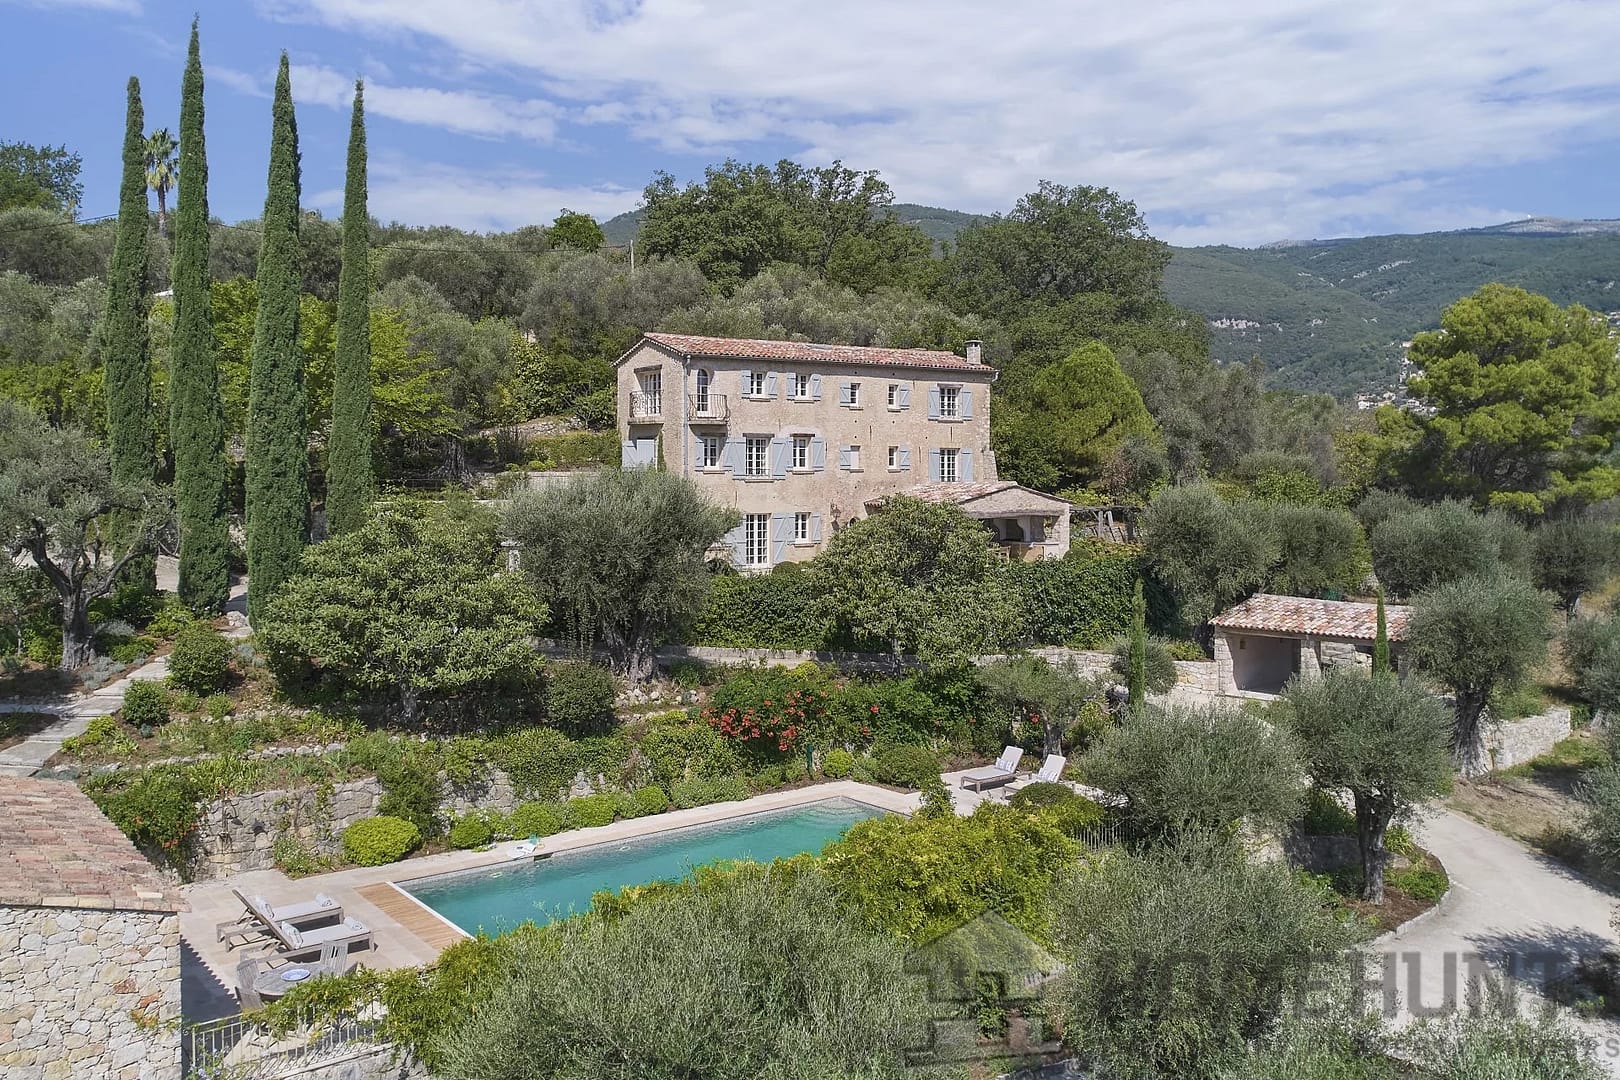 5 Bedroom Villa/House in Chateauneuf Grasse 13